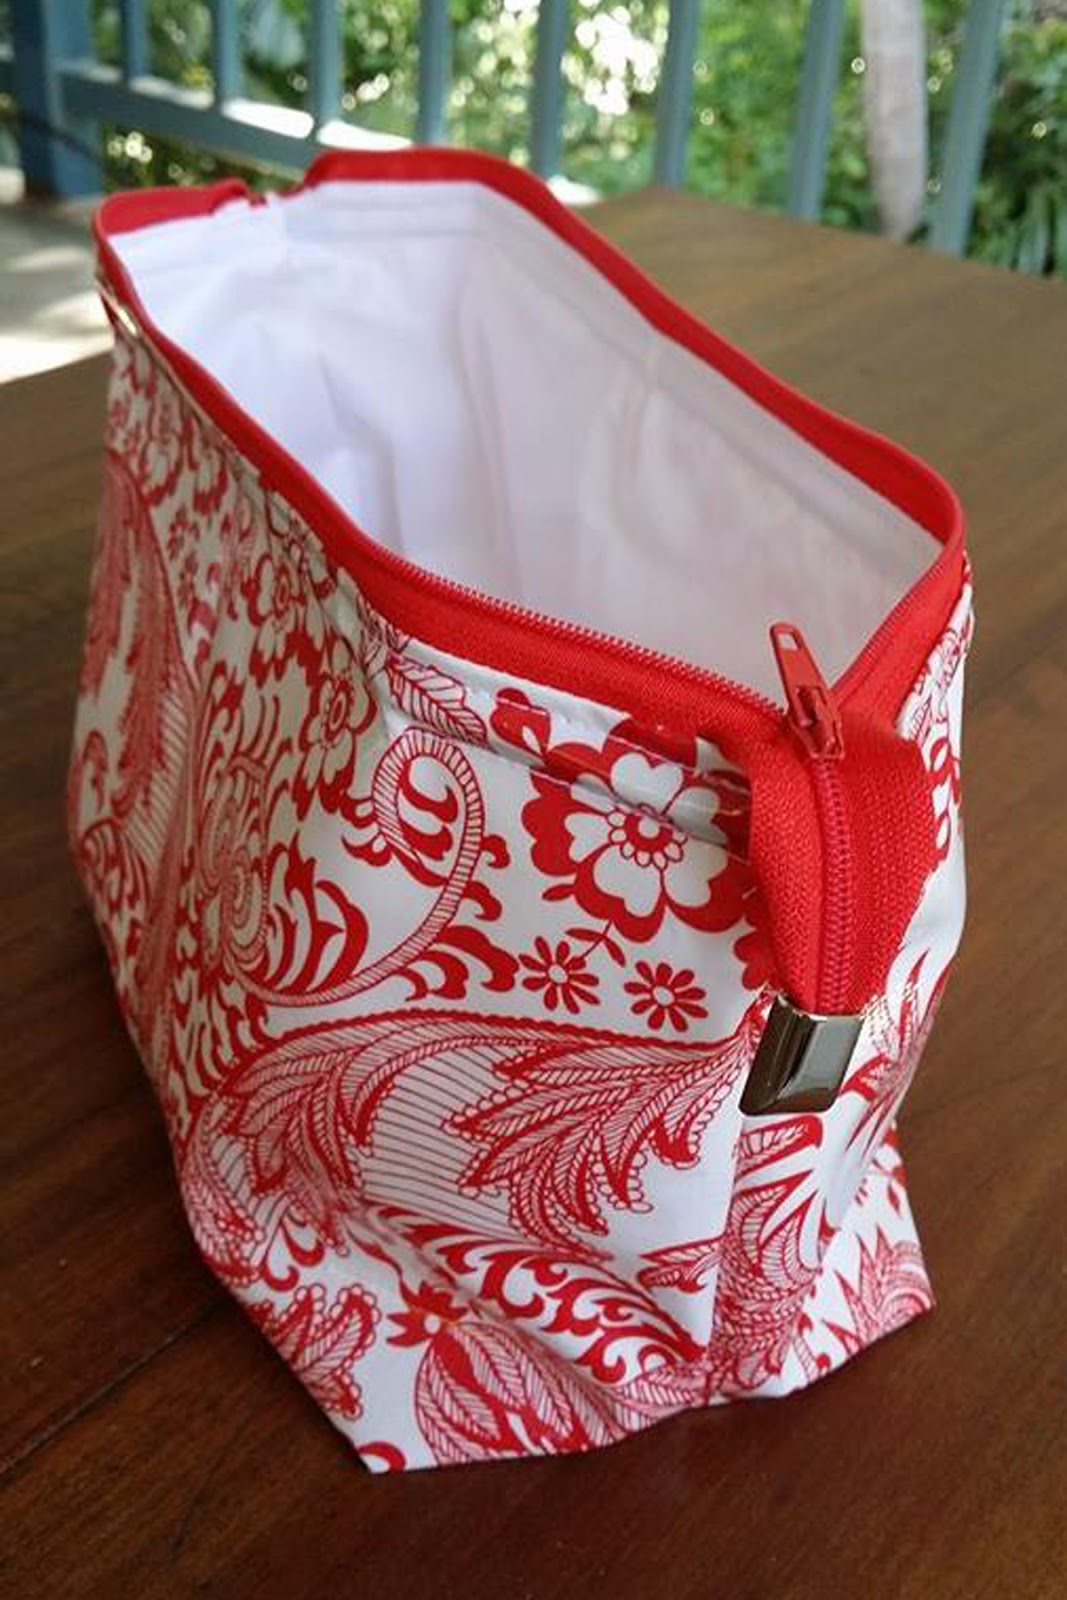 Emmaline Bags: Sewing Patterns and Purse Supplies: The Retreat Bag - A FREE Sewing Tutorial